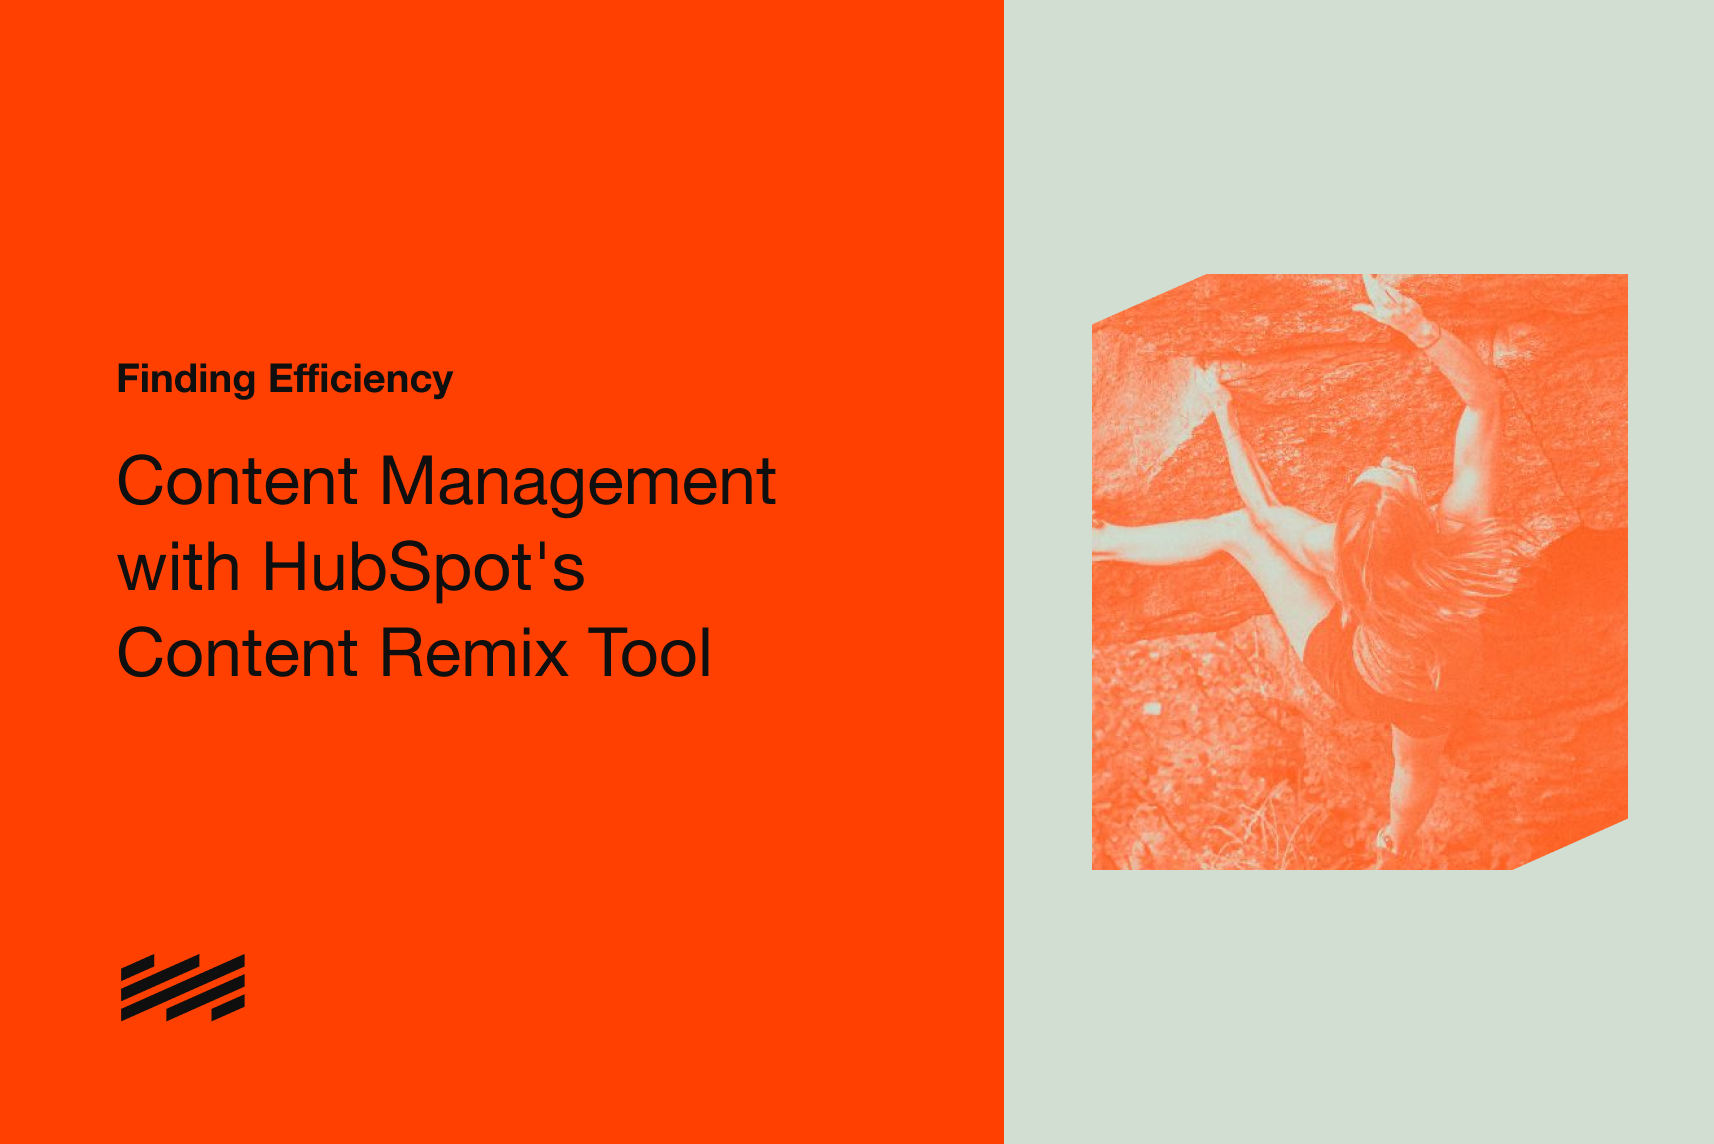 Finding Efficiency: Navigating the Content Management Landscape with HubSpot's Content Remix